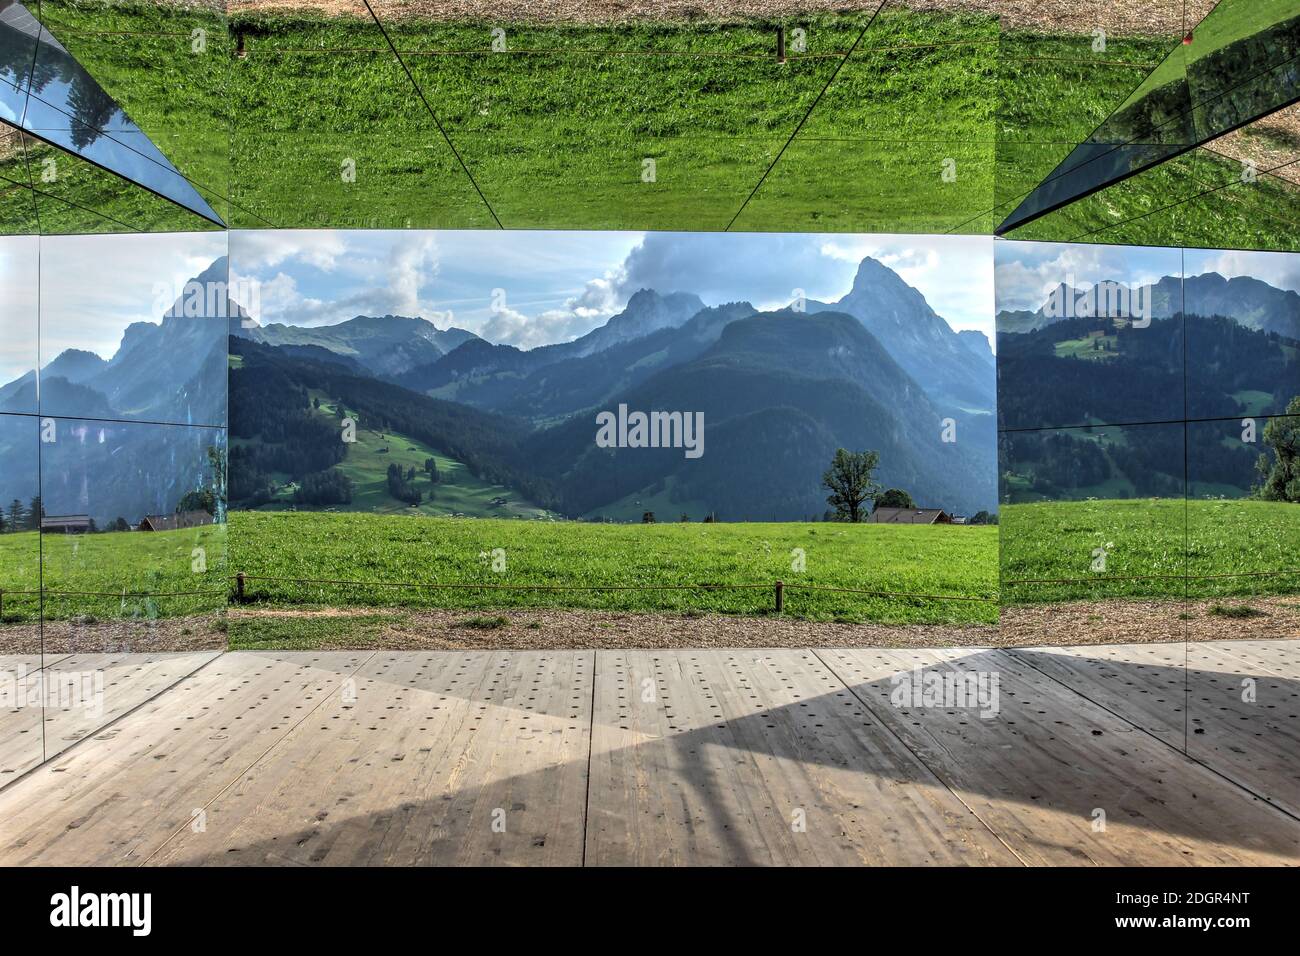 Gstaad, Switzerland - August 15, 2020 - Landscape of the Swiss Alps mirrored by the walls of the Mirage, temporary art instalation by Doug Aitken cons Stock Photo